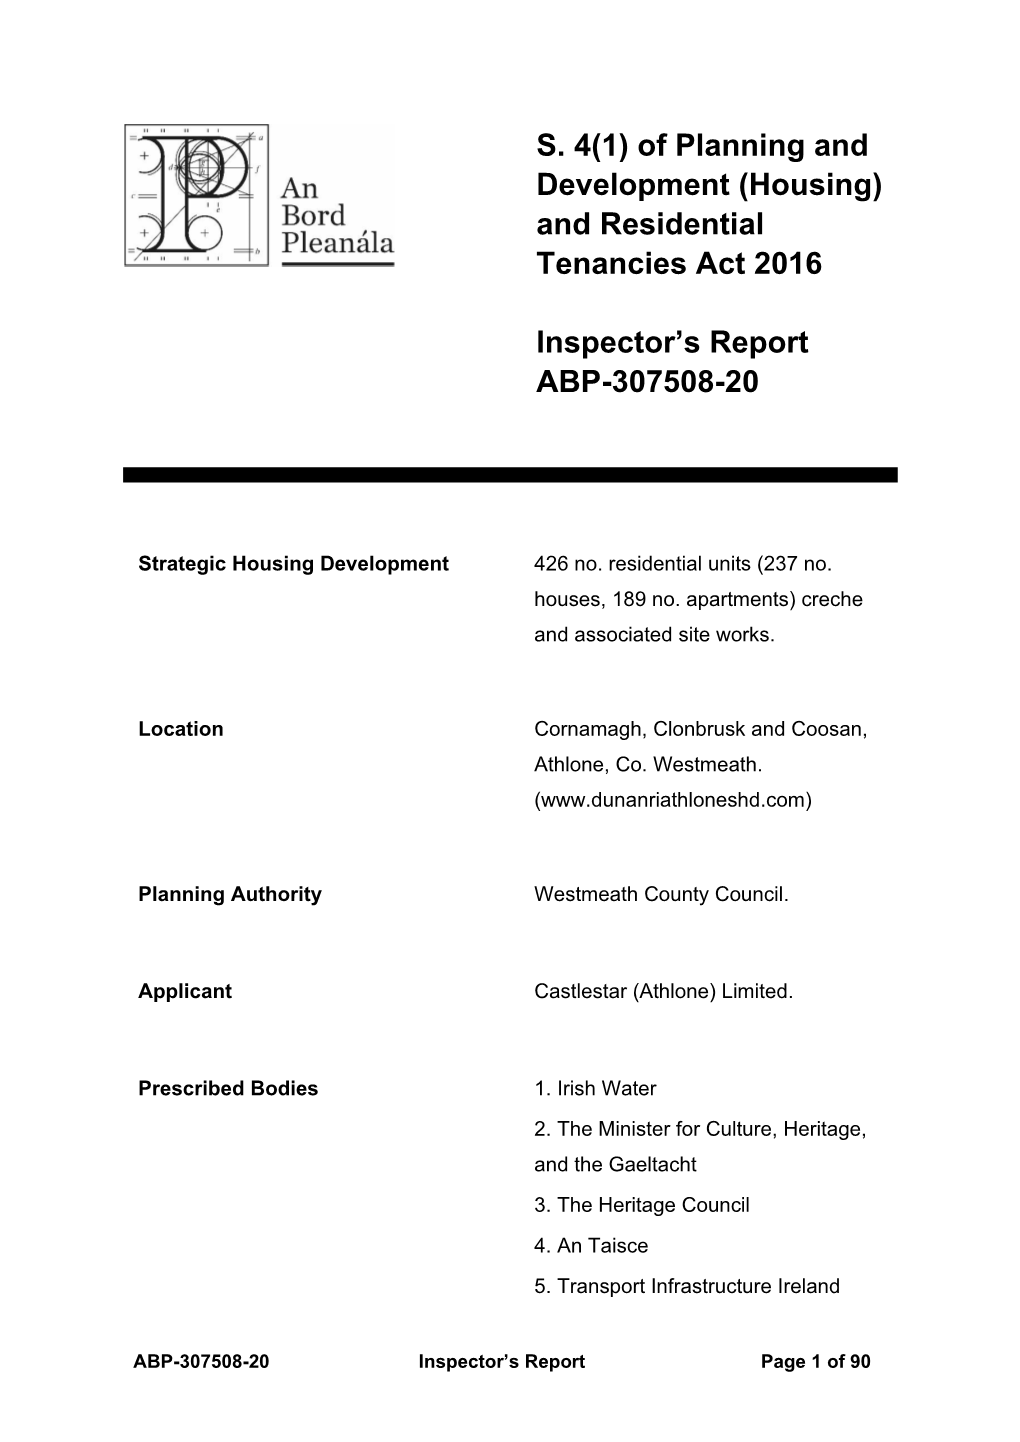 And Residential Tenancies Act 2016 Inspector's Report ABP-307508-20